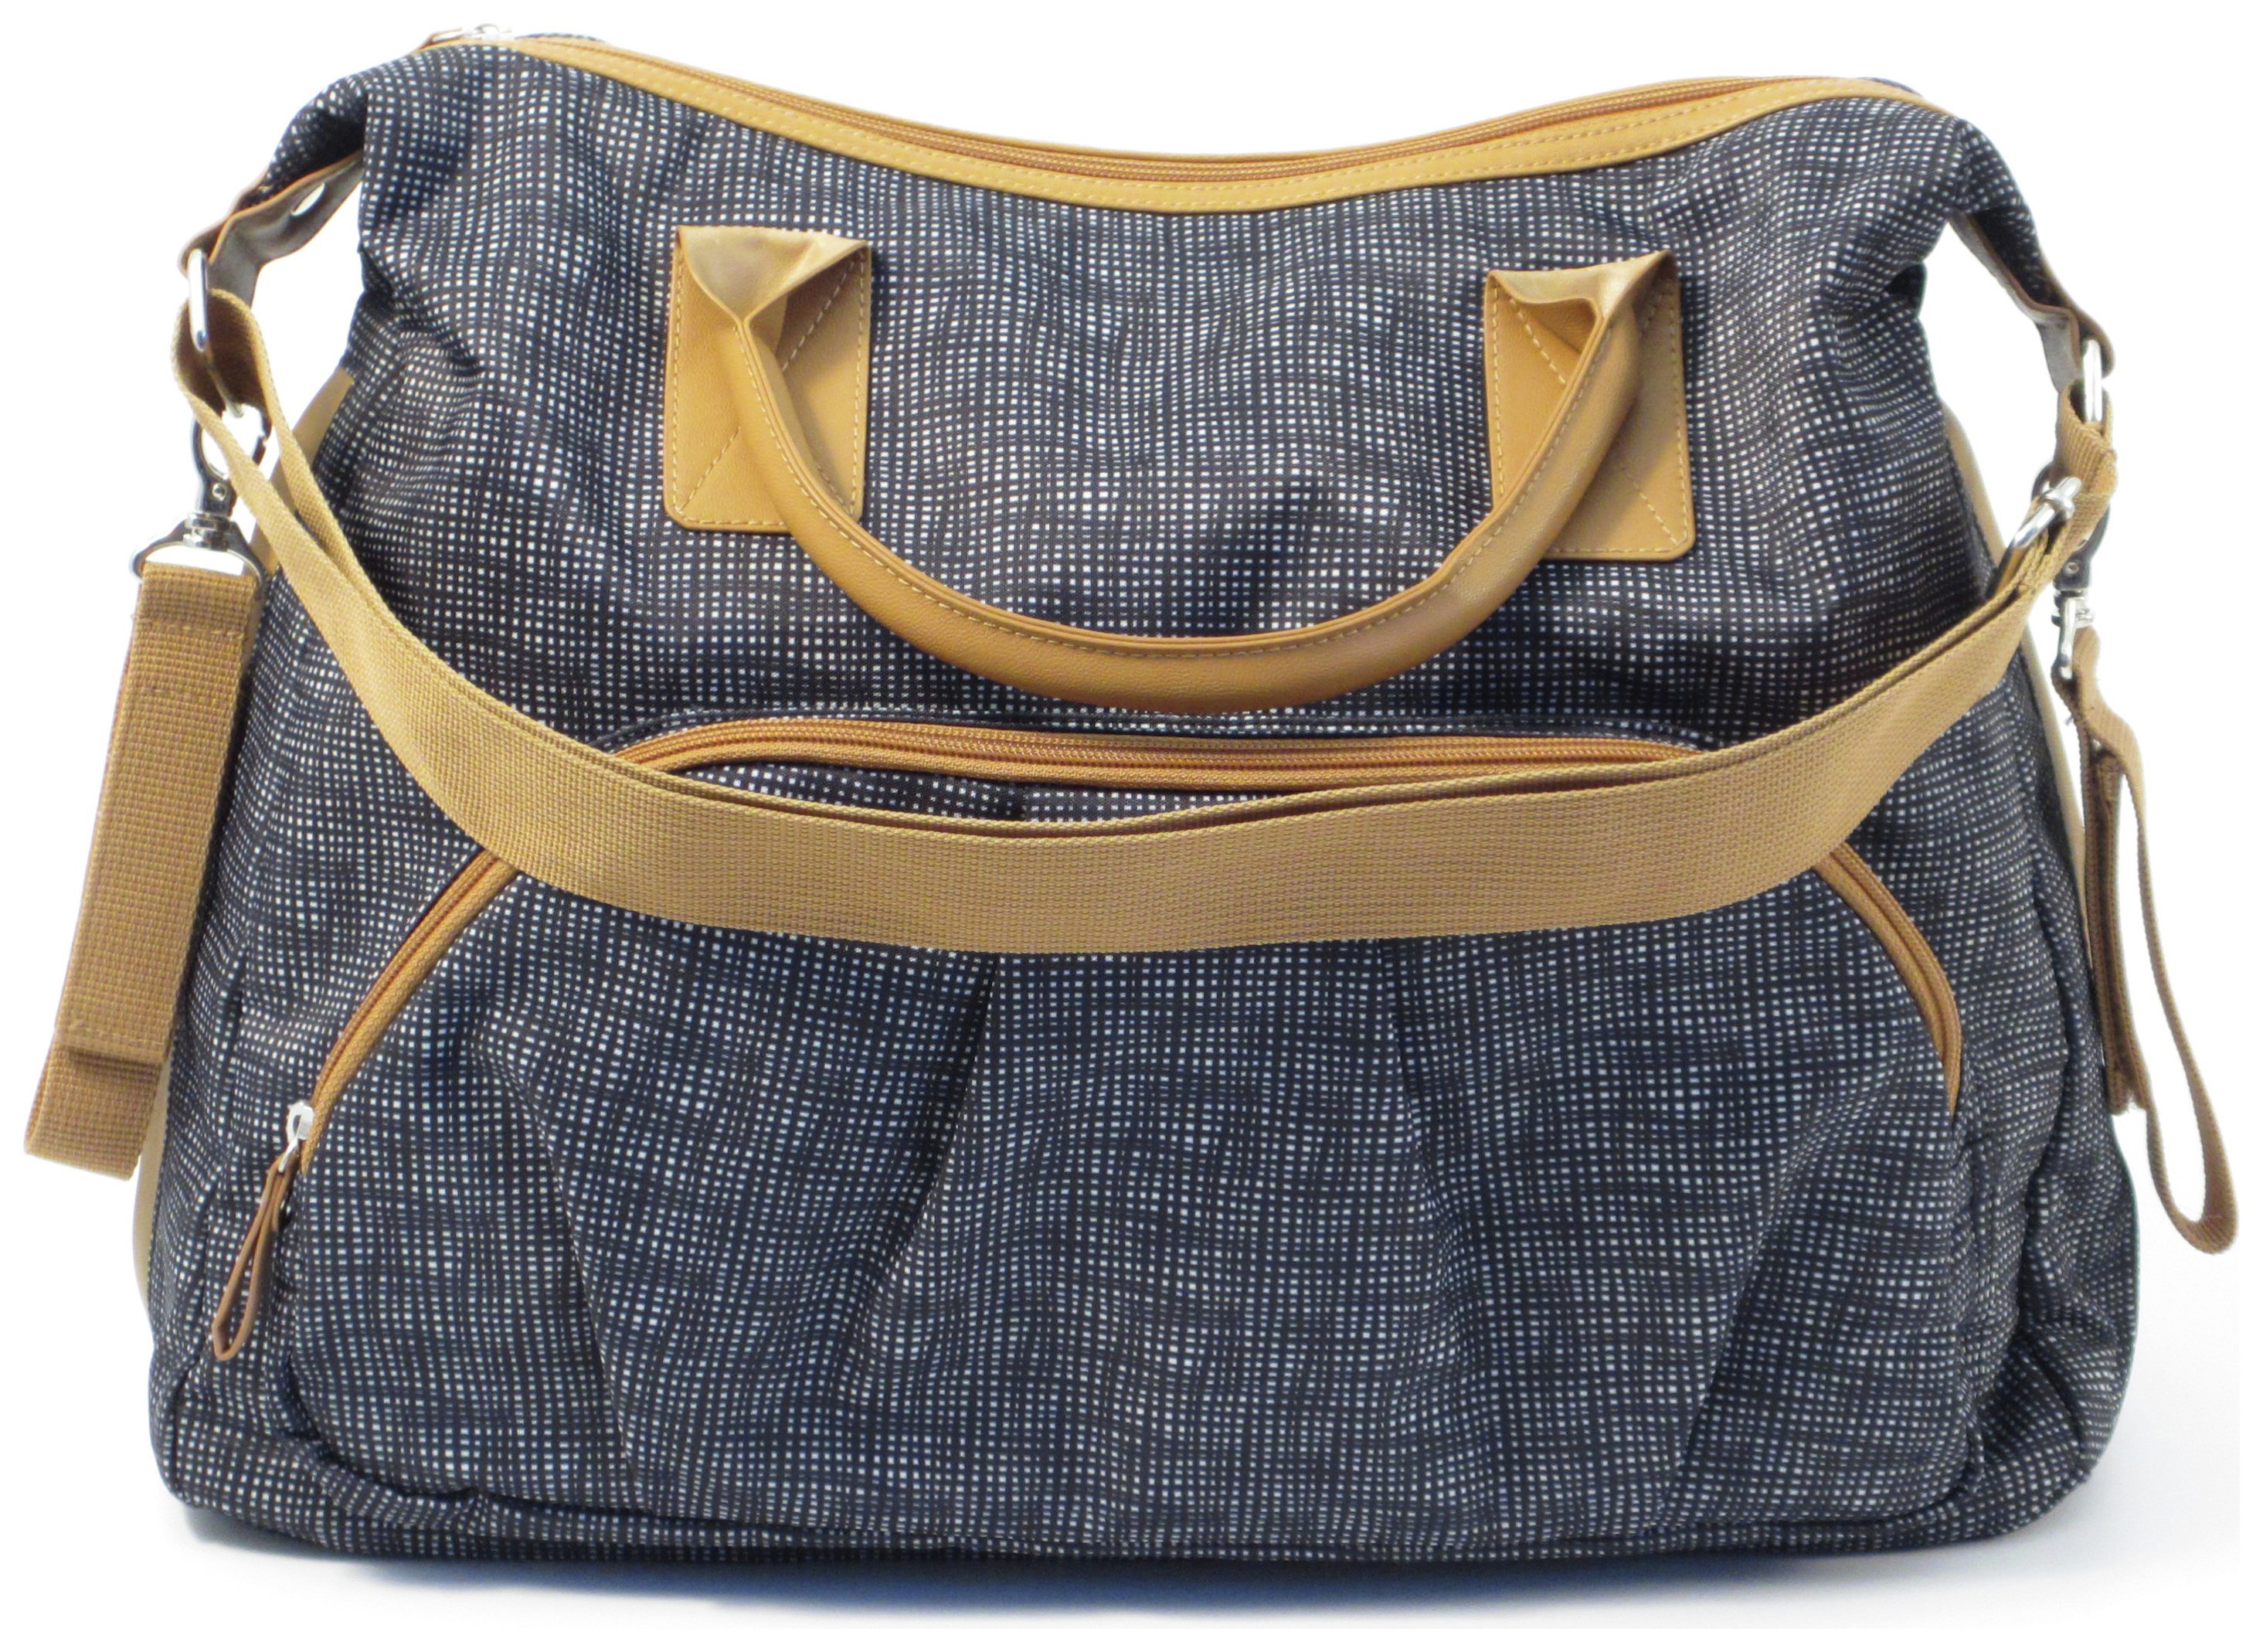 Summer Infant Tote Changing Bag - Charcoal Tan